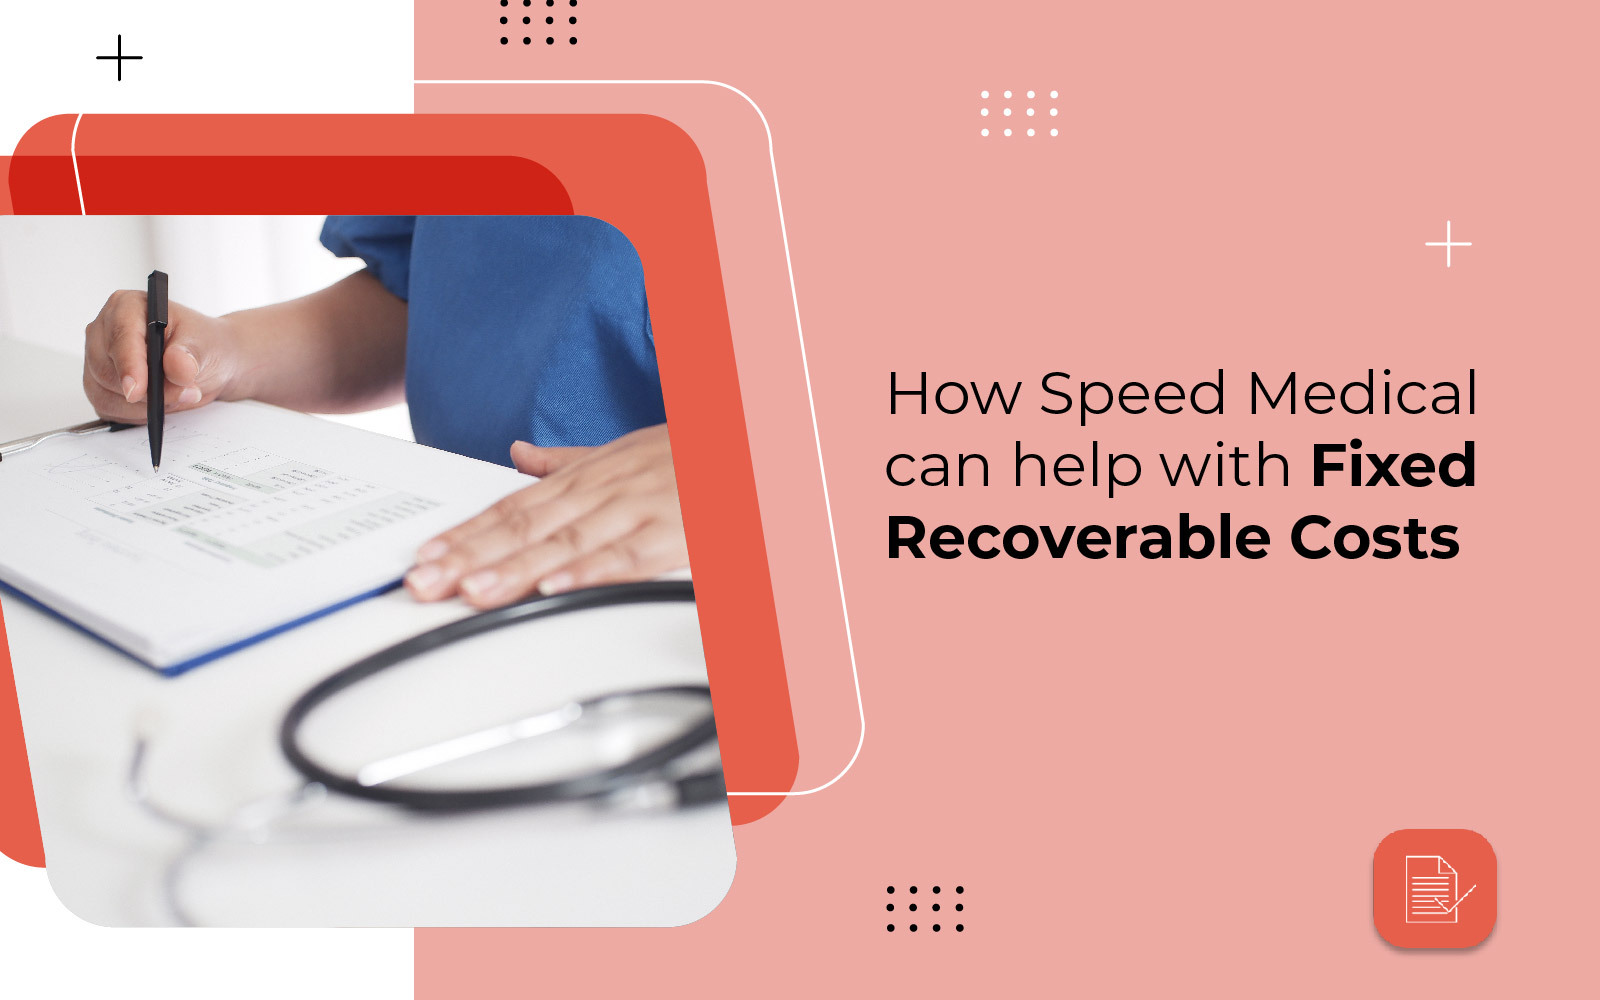 How Speed Medical can help with Fixed Recoverable Costs